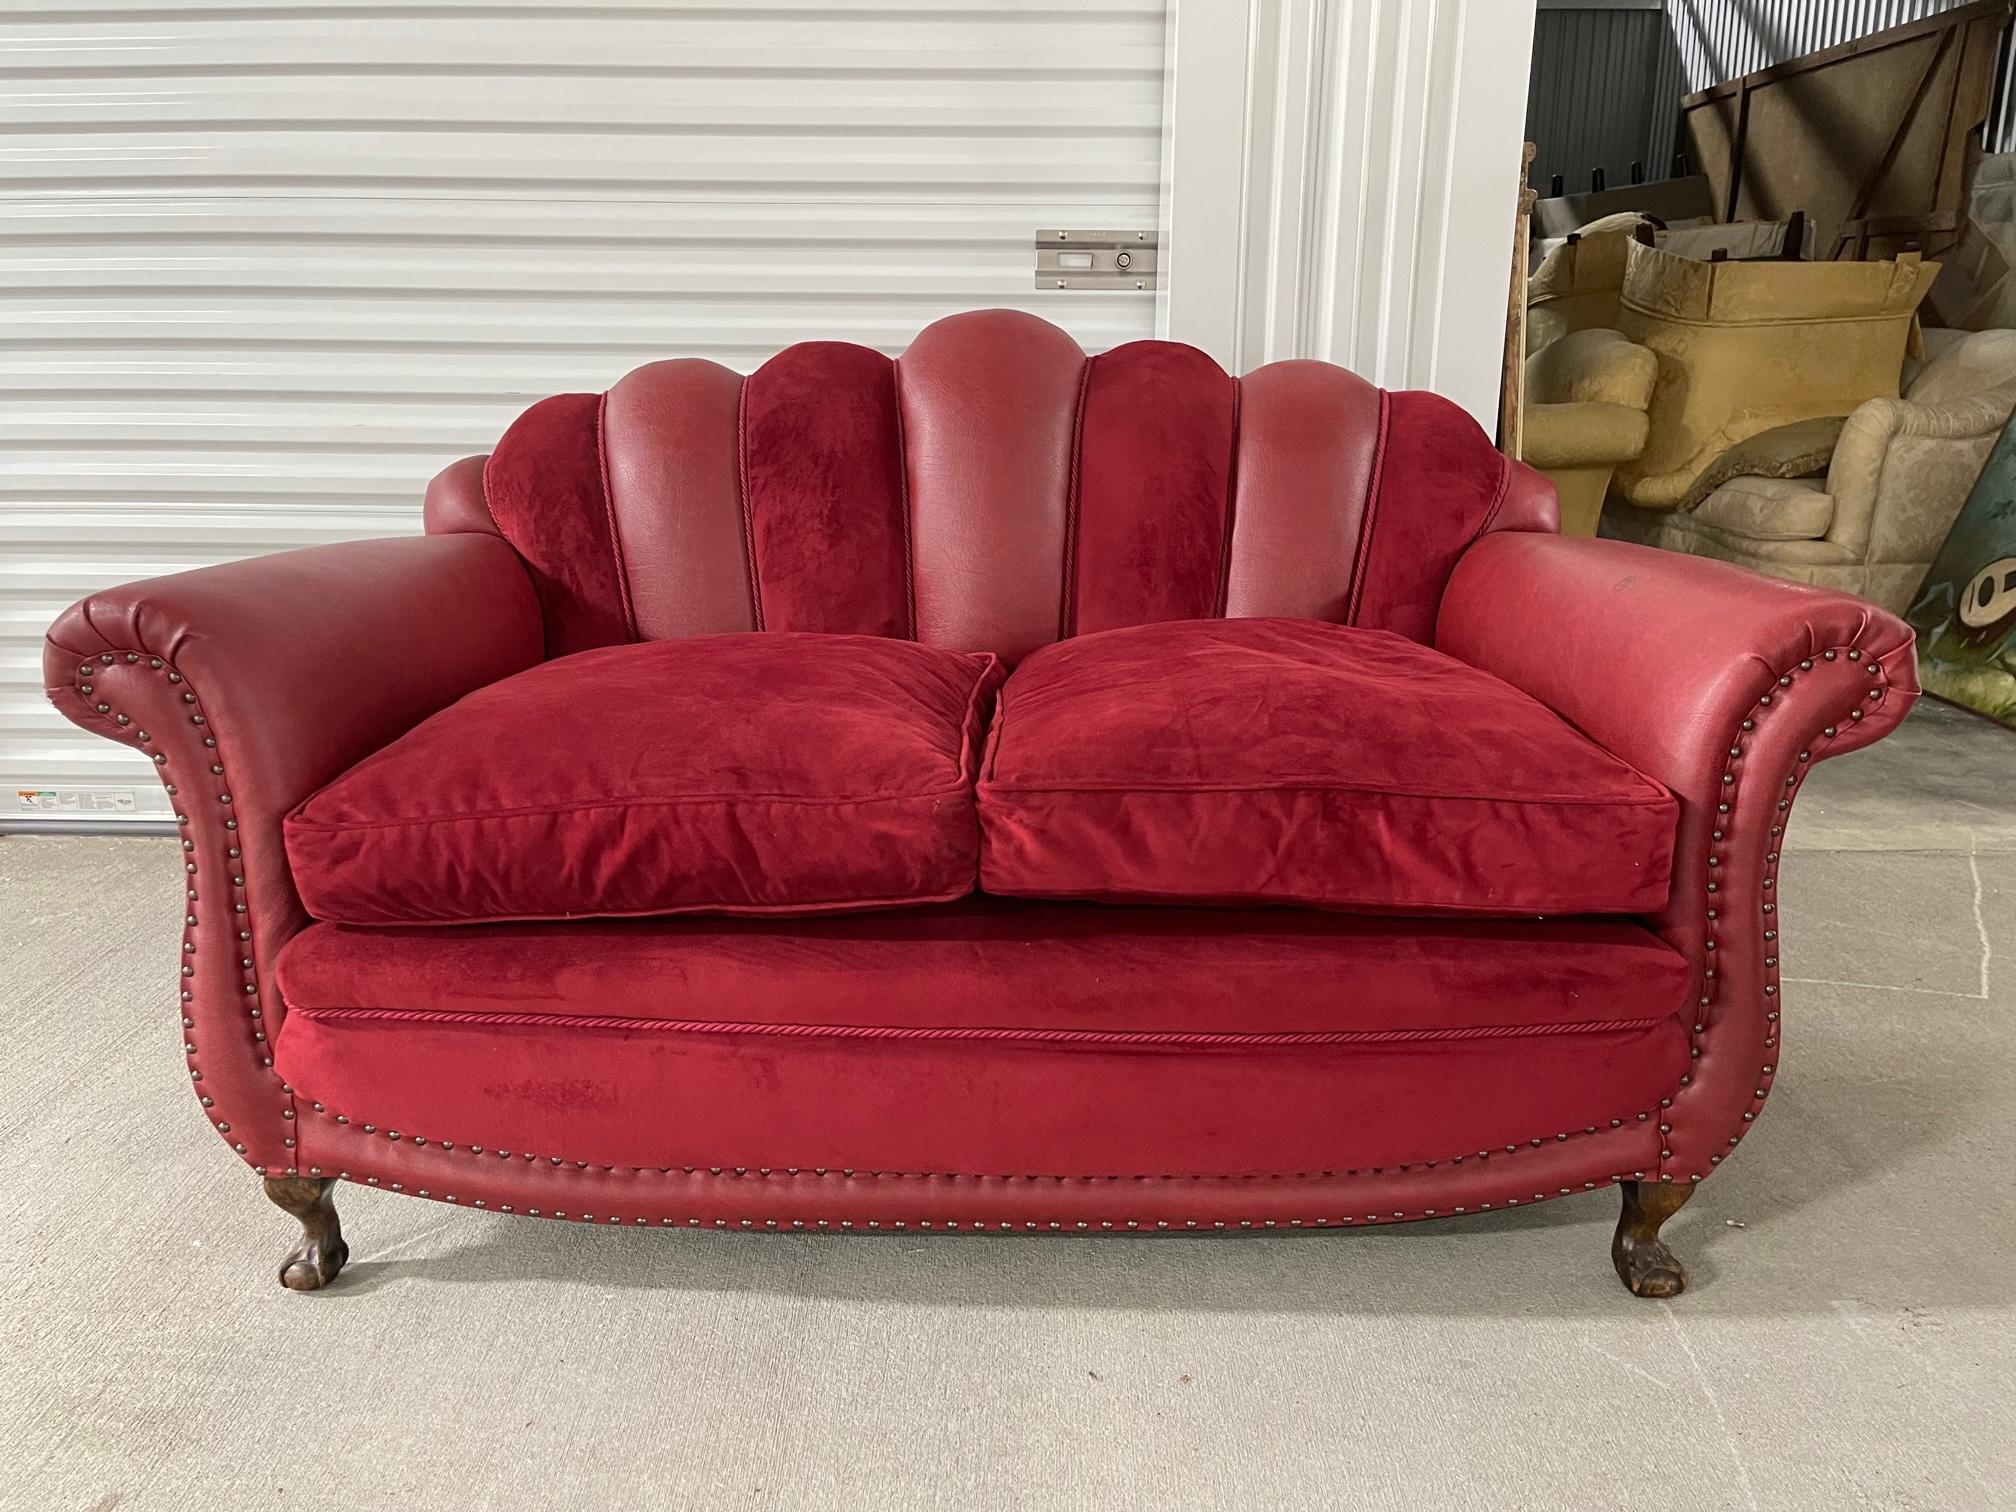 Contemporary velvet and leather sofa, 20th Century. Seat height is 23.5